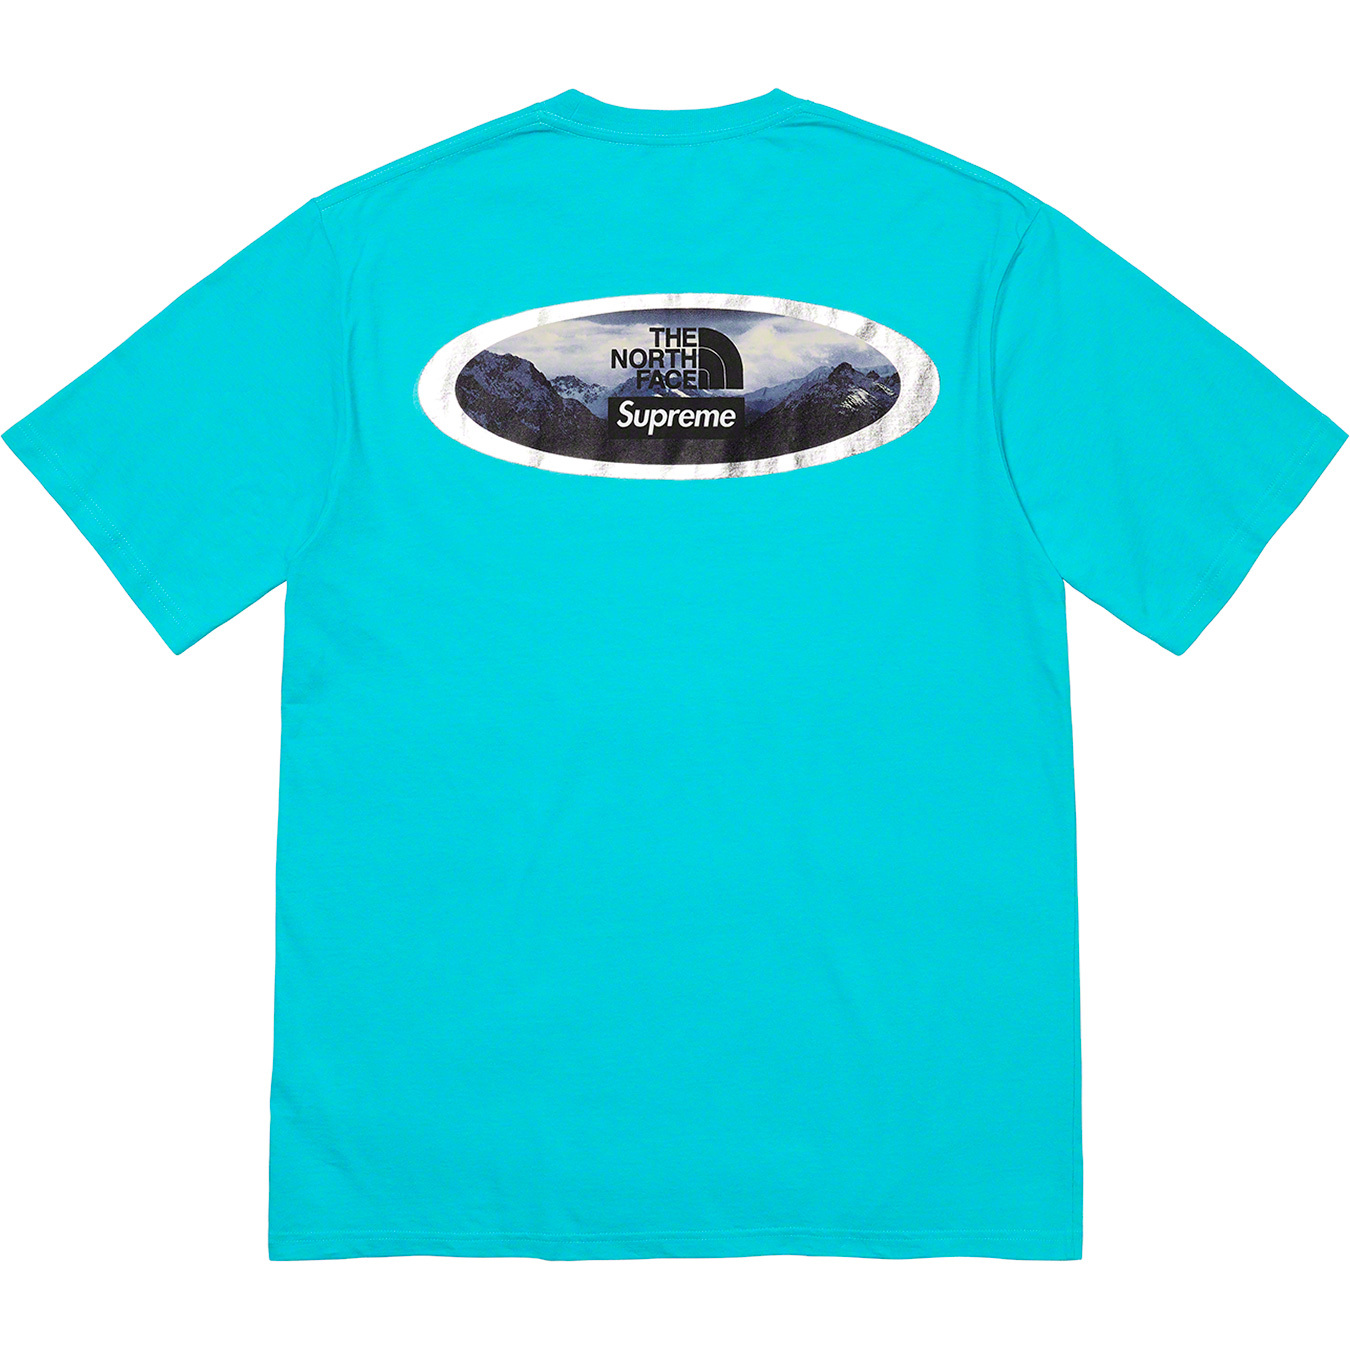 The North Face Mountains Tee - fall winter 2021 - Supreme